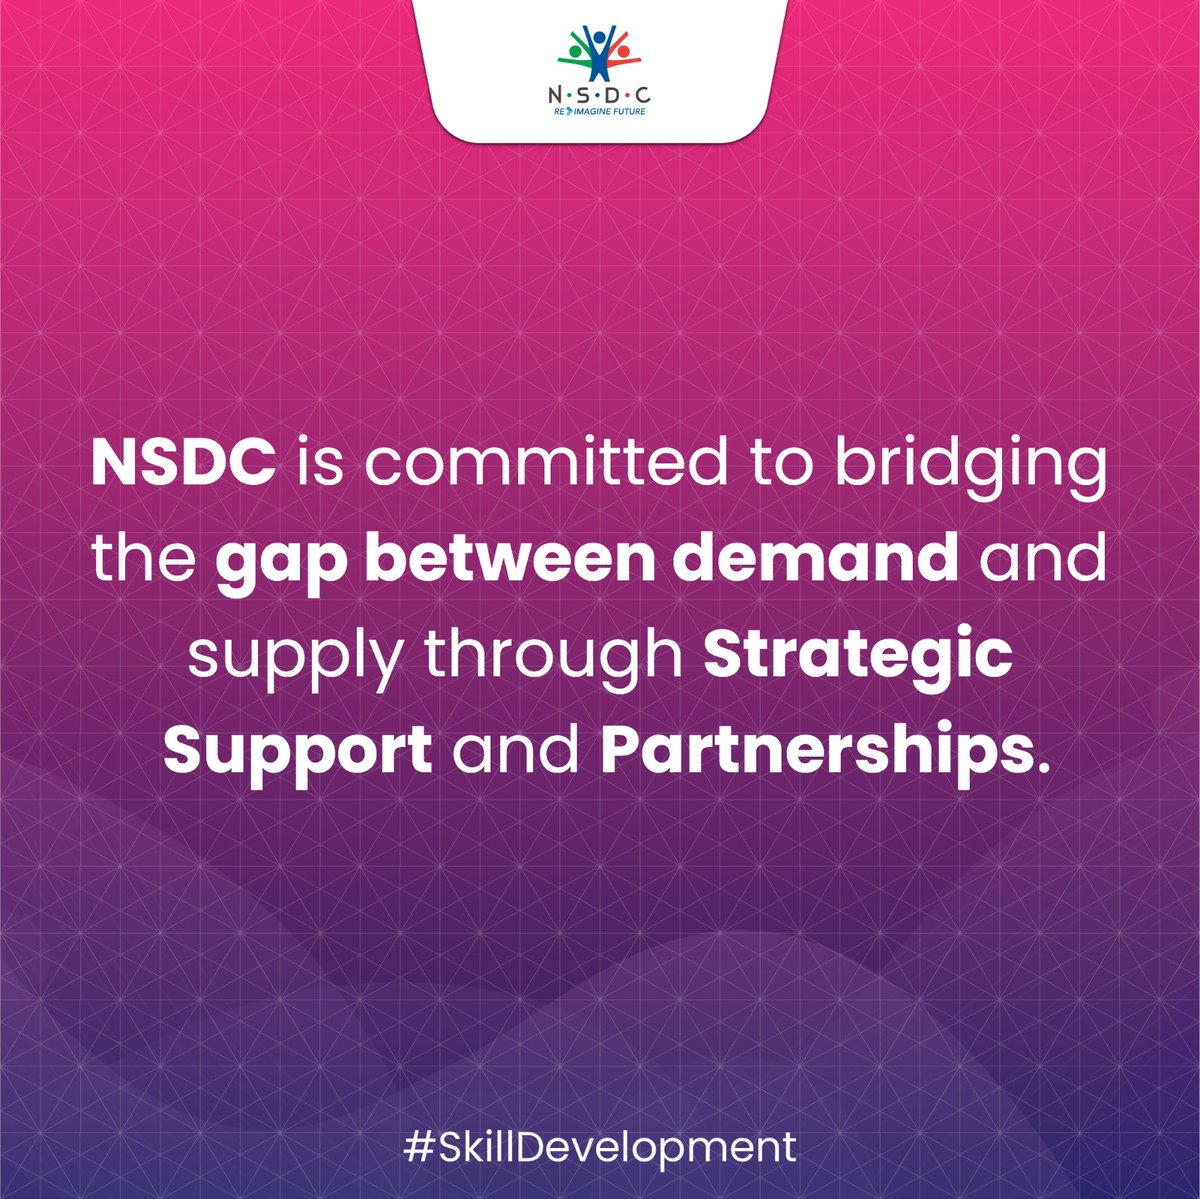 In a world where opportunities abound for those equipped with the right skills, empowerment begins with the mastery of new abilities. At NSDC, we understand the transformative power of skill development and are dedicated to igniting that spark of potential within individuals.